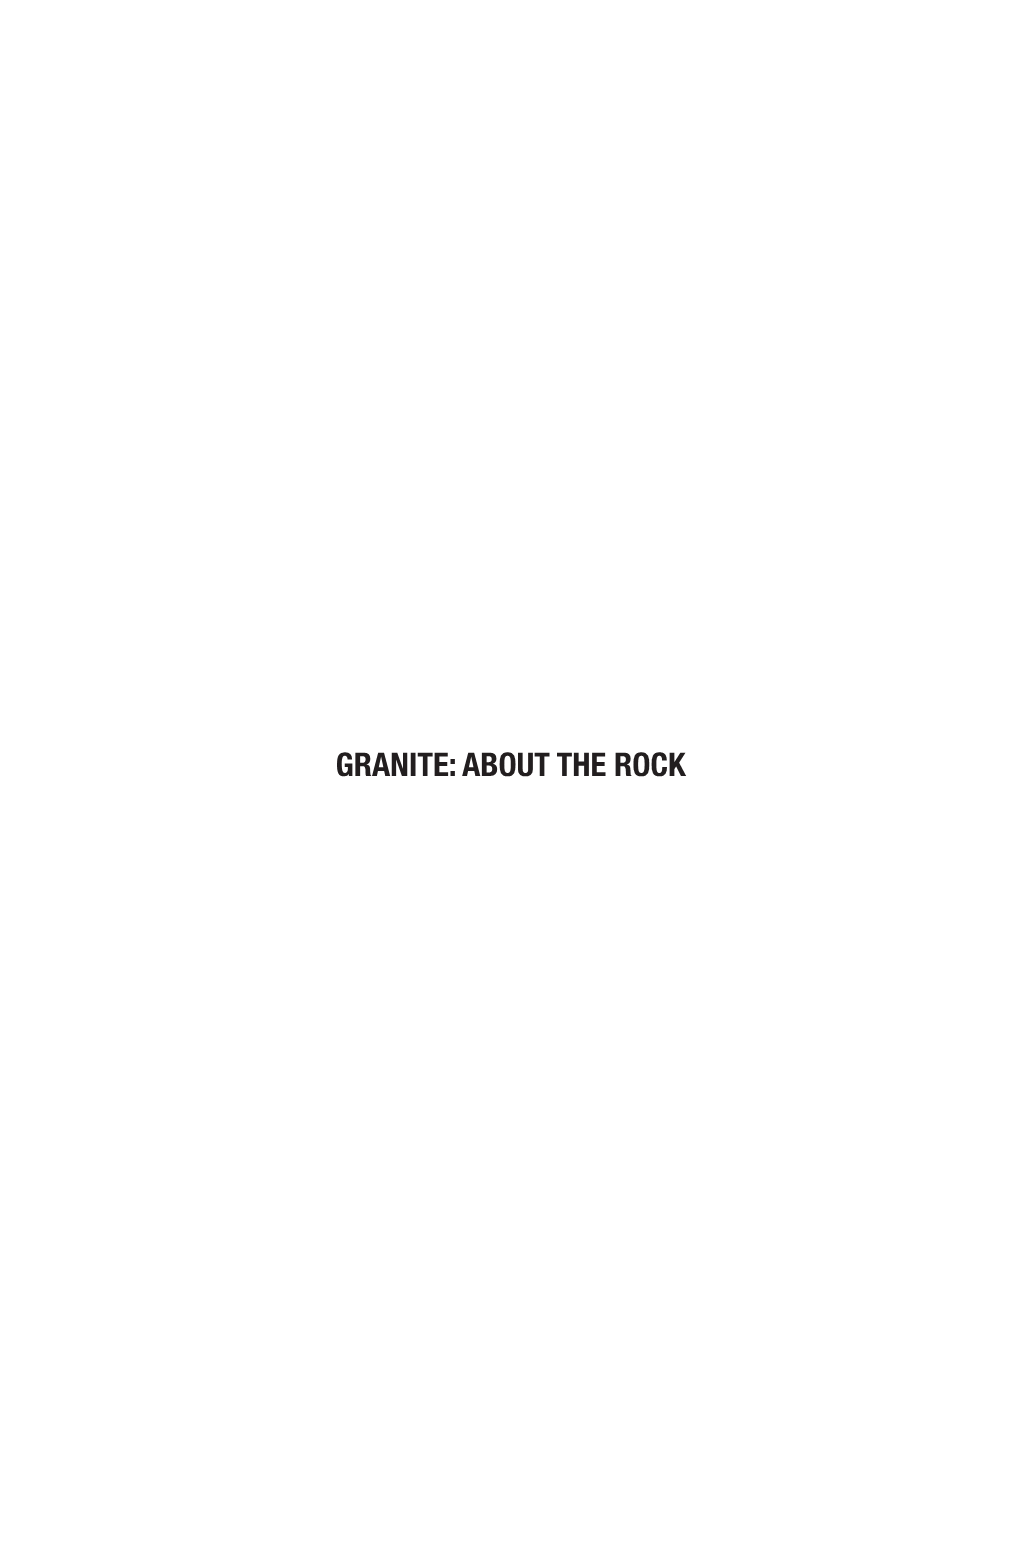 Granite: About the Rock